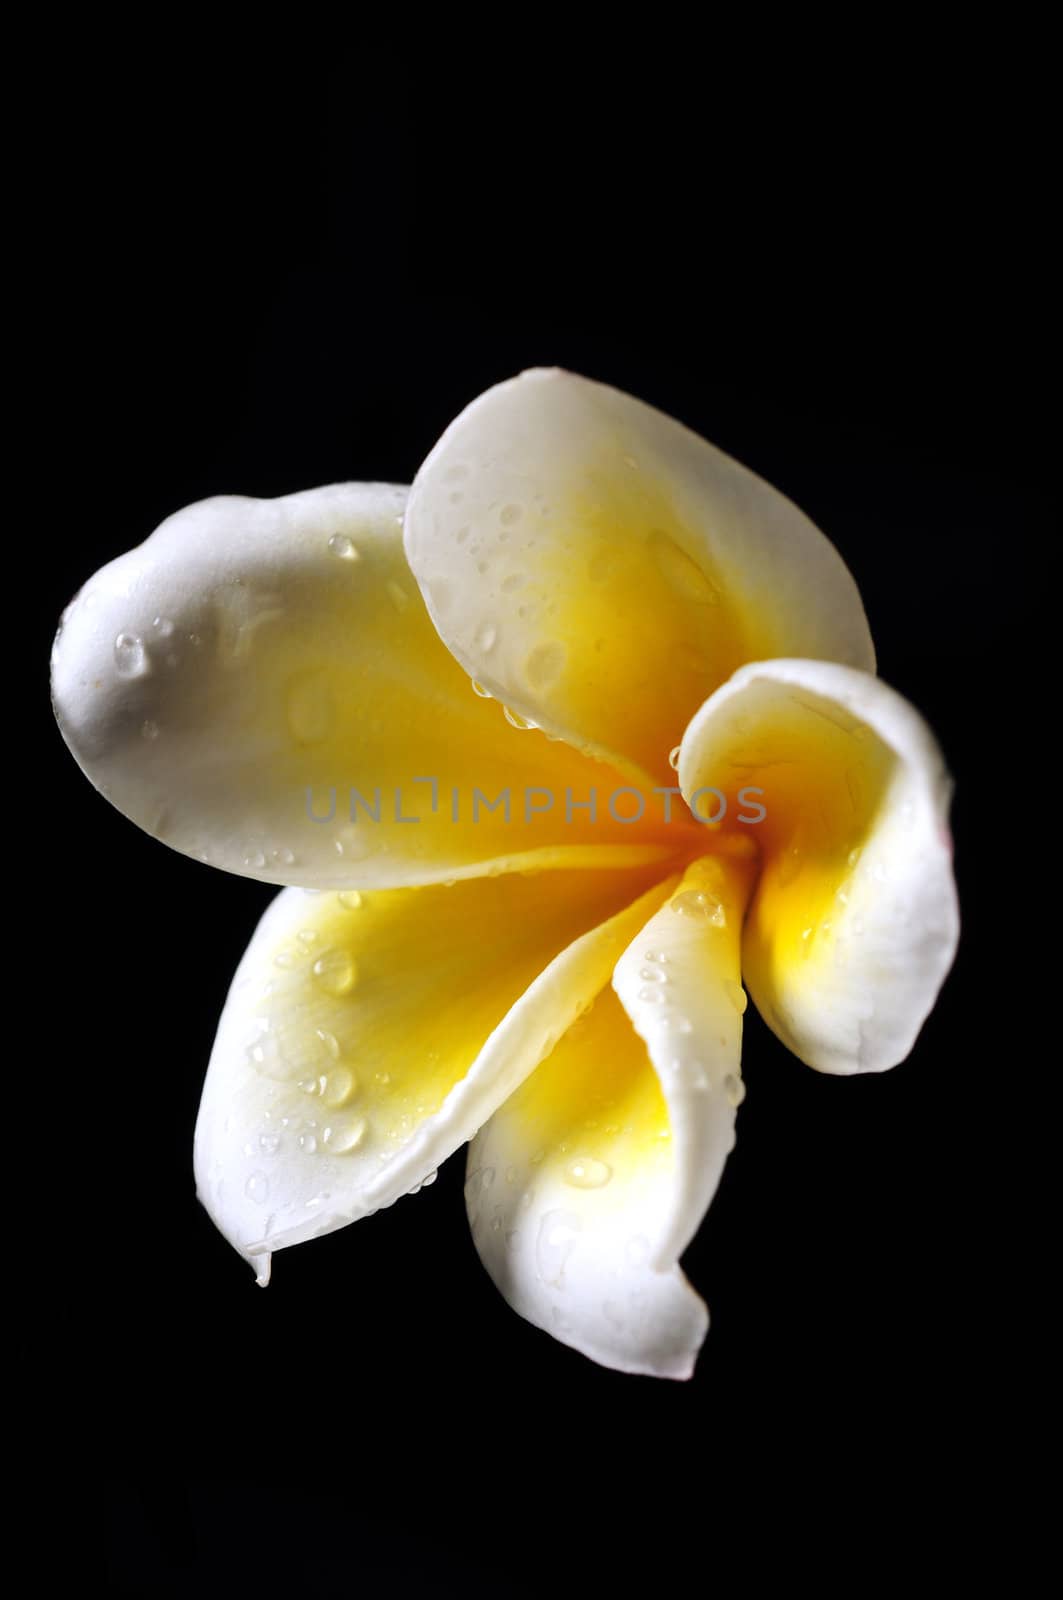 White and yellow Frangipani flower isolated on black by ftlaudgirl